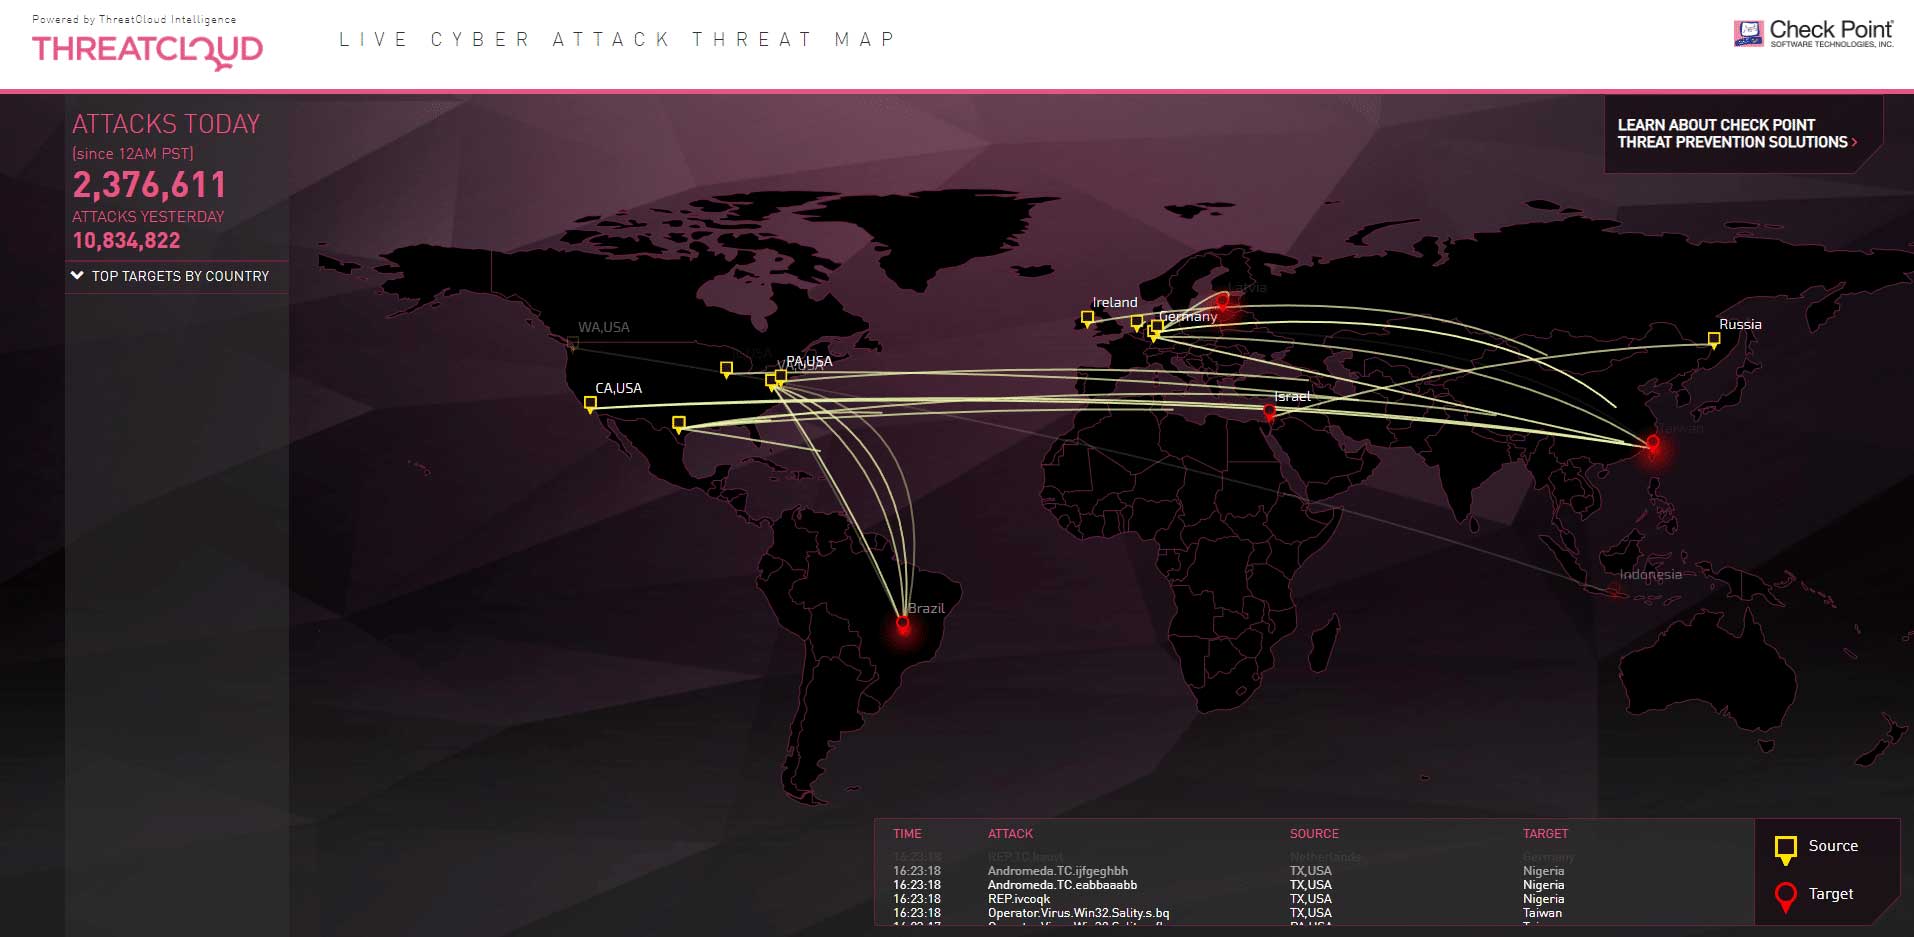 Cyber Attack Map by Check Point